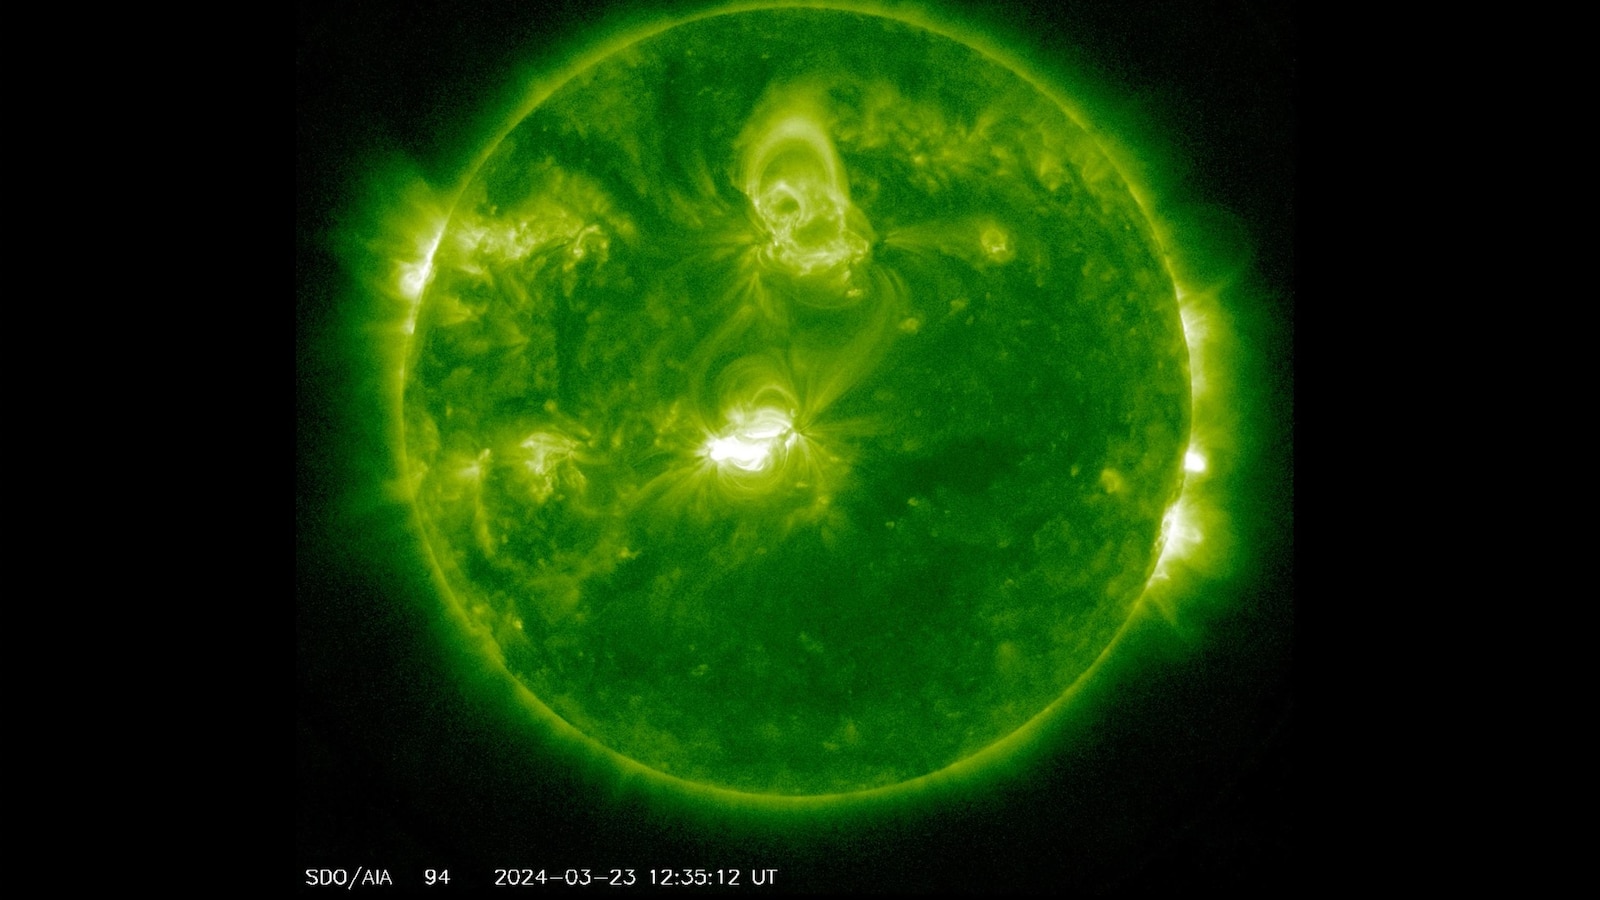 Potential Impacts of Geomagnetic Storms from Solar Flares on Radio Communications and Aurora Activity